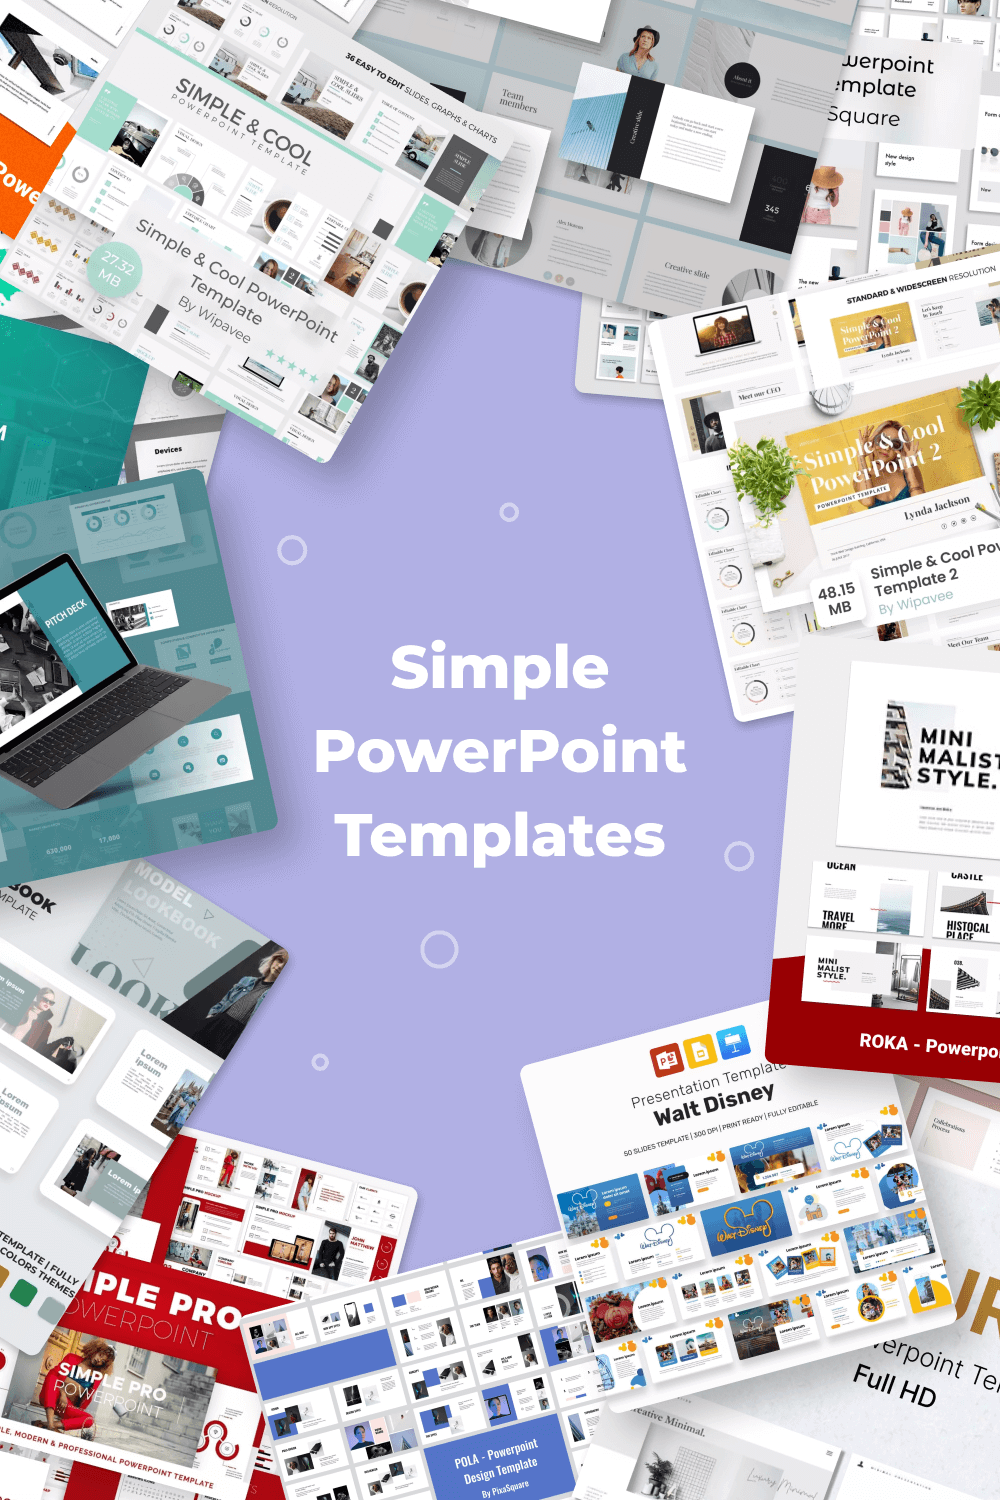 2.1 simple powerpoint templates 89